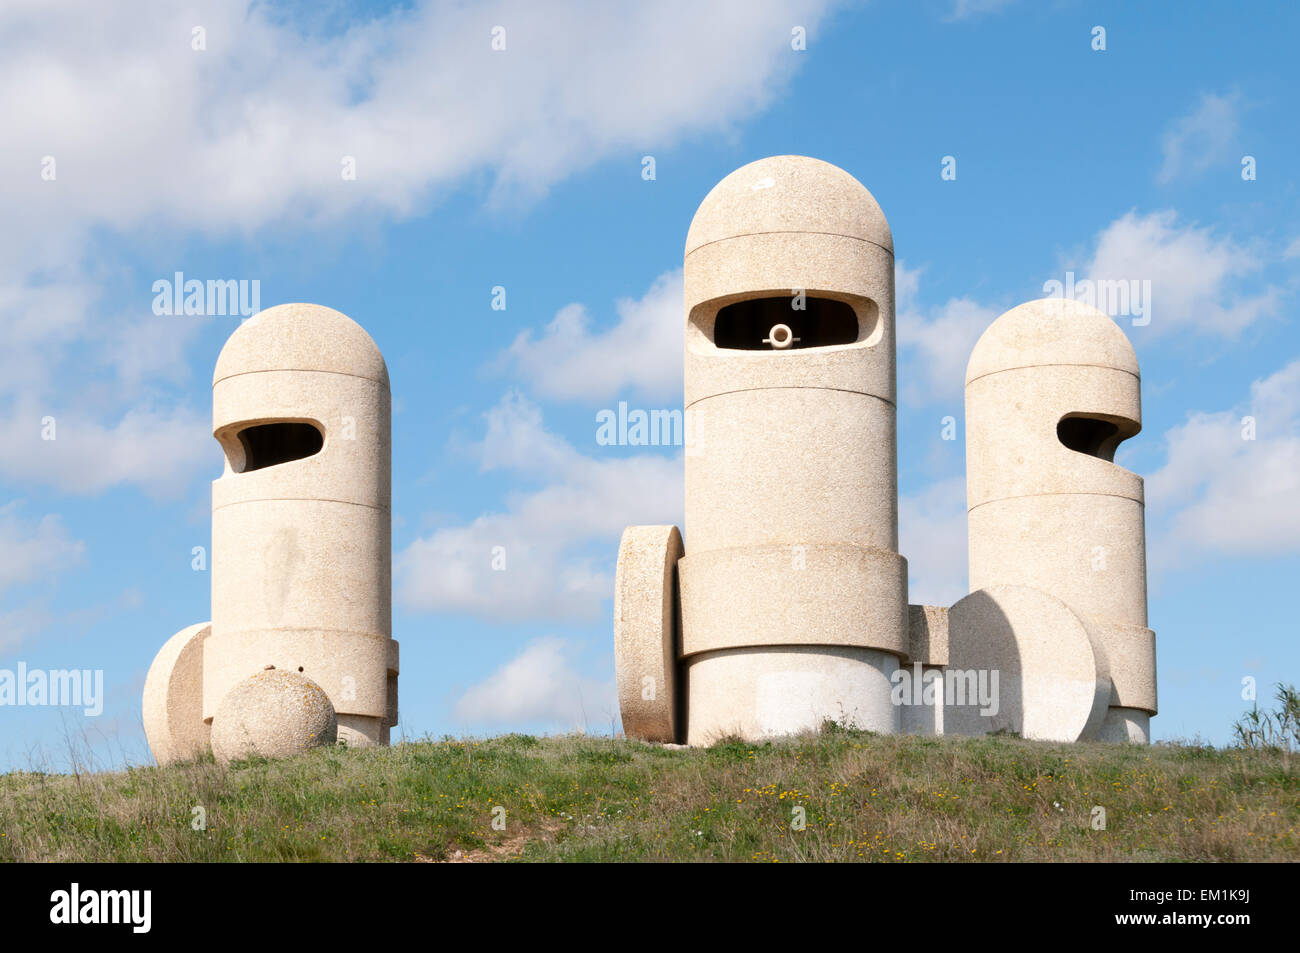 The Cathar Knights is a cement sculpture by Jacques Tissinier above the A61 autoroute at the Aire De Peche Loubat service area. Stock Photo